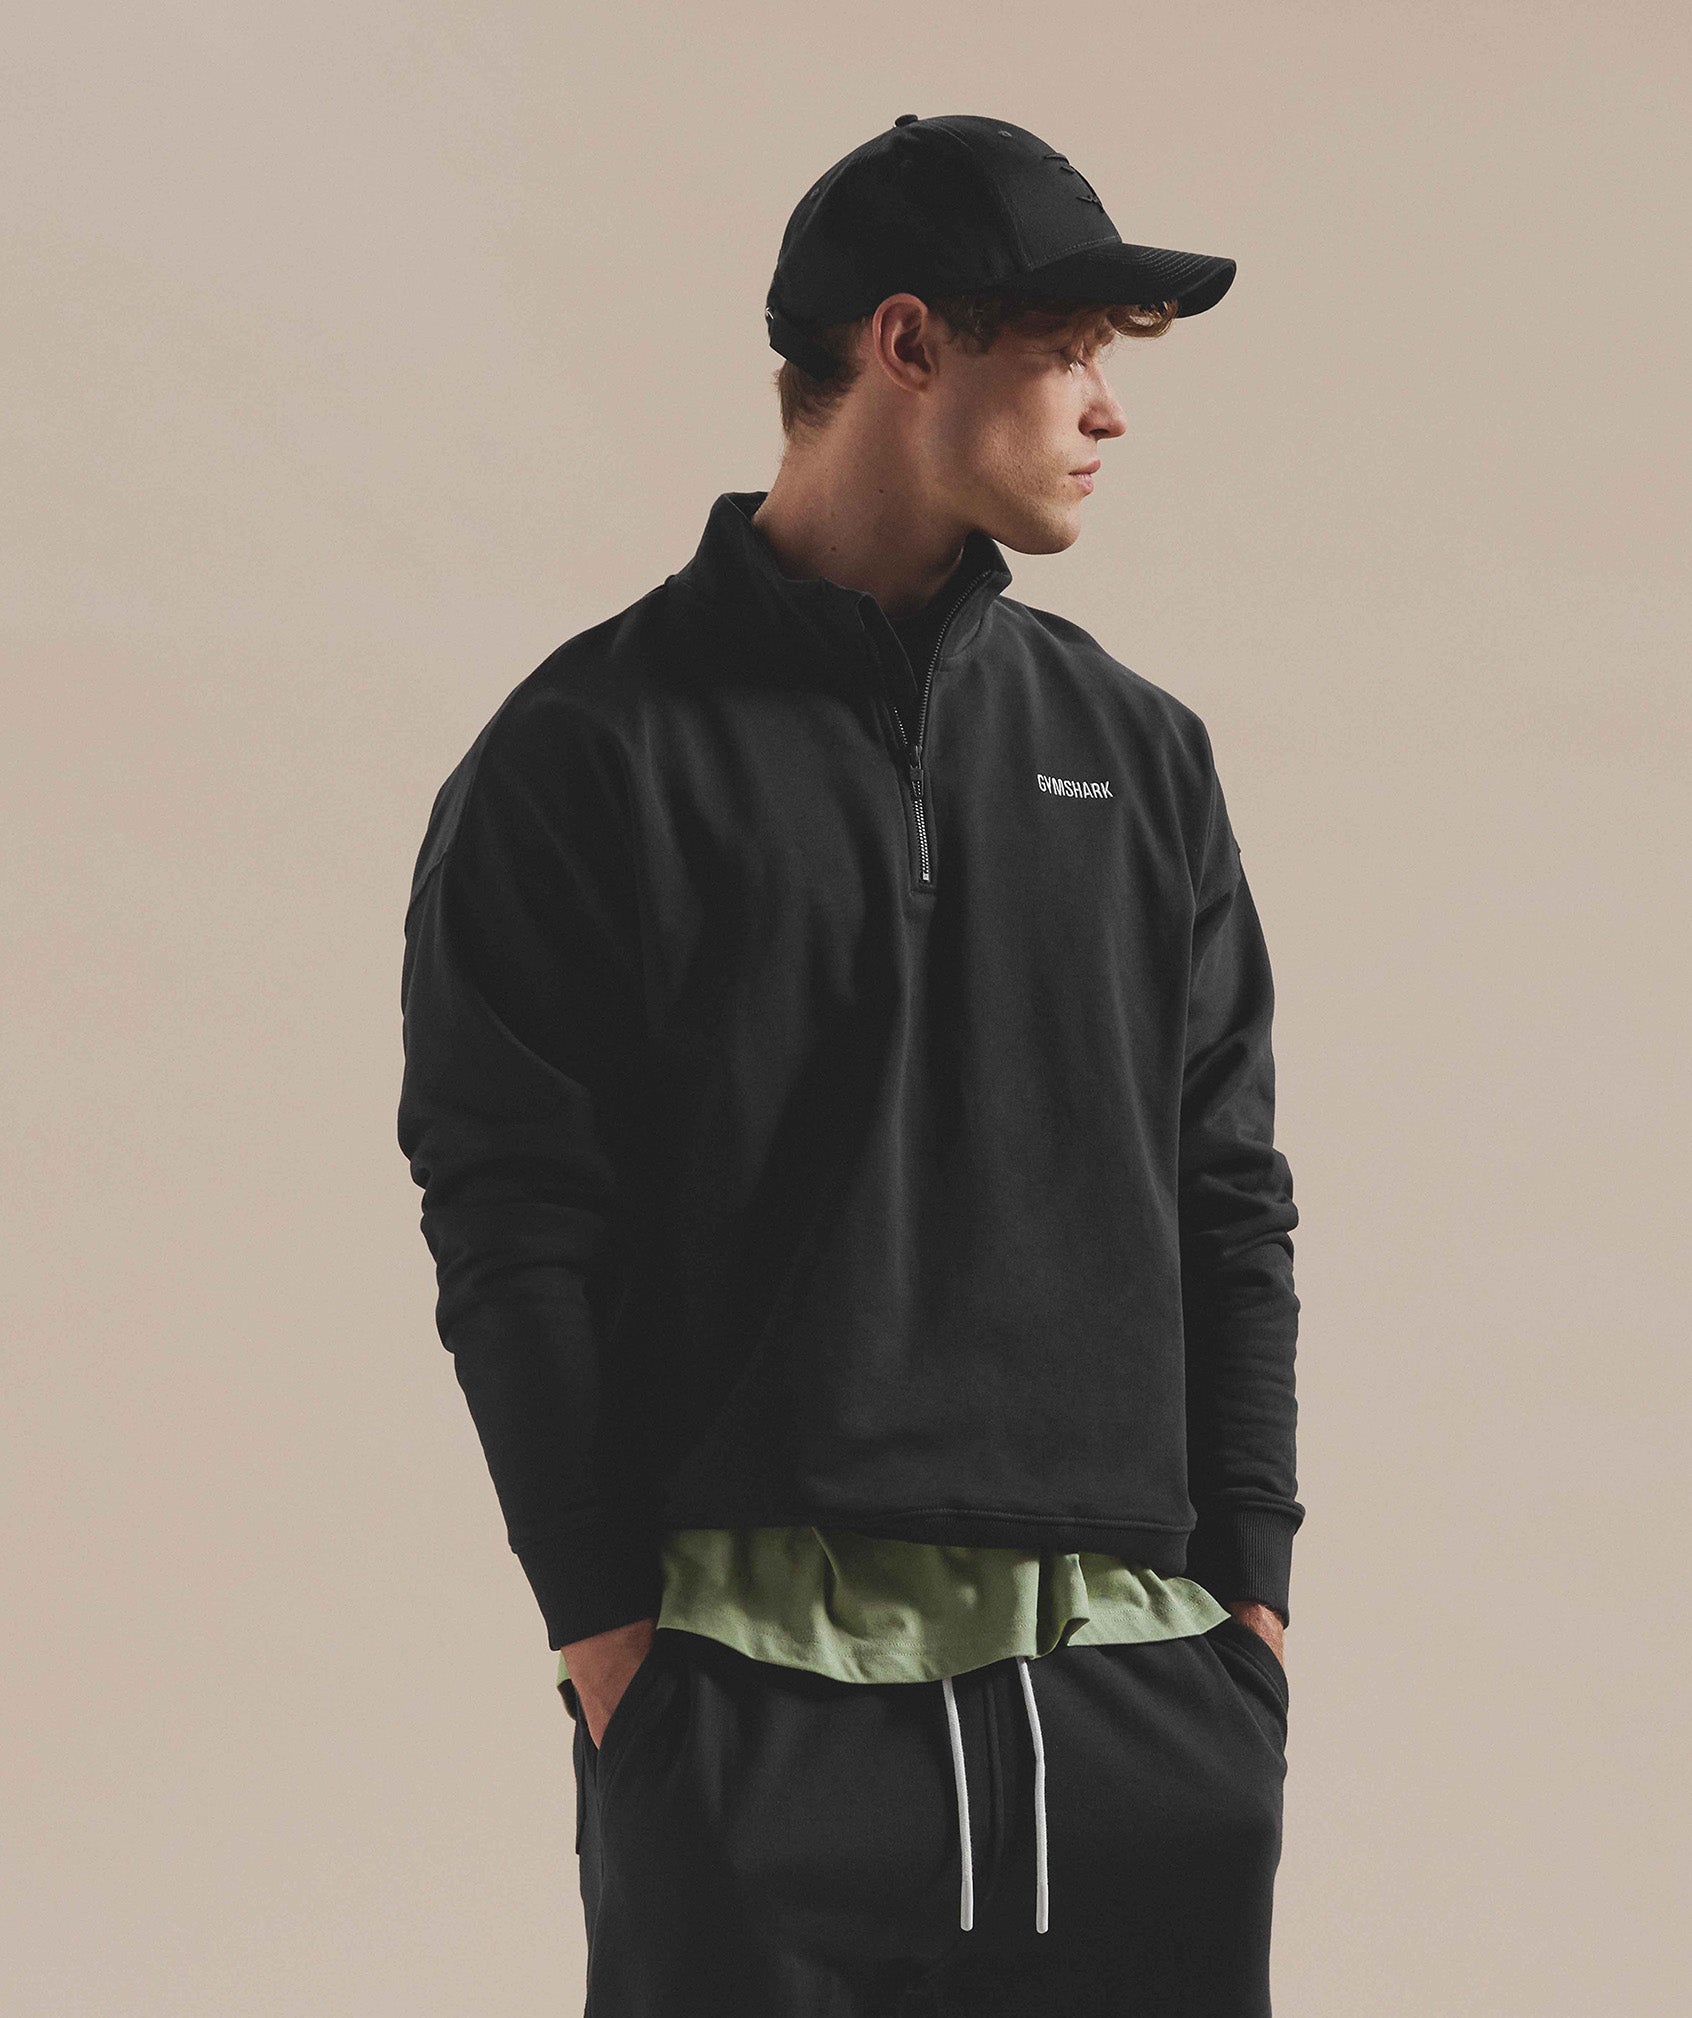 Rest Day Sweats 1/4 Zip in {{variantColor} is out of stock